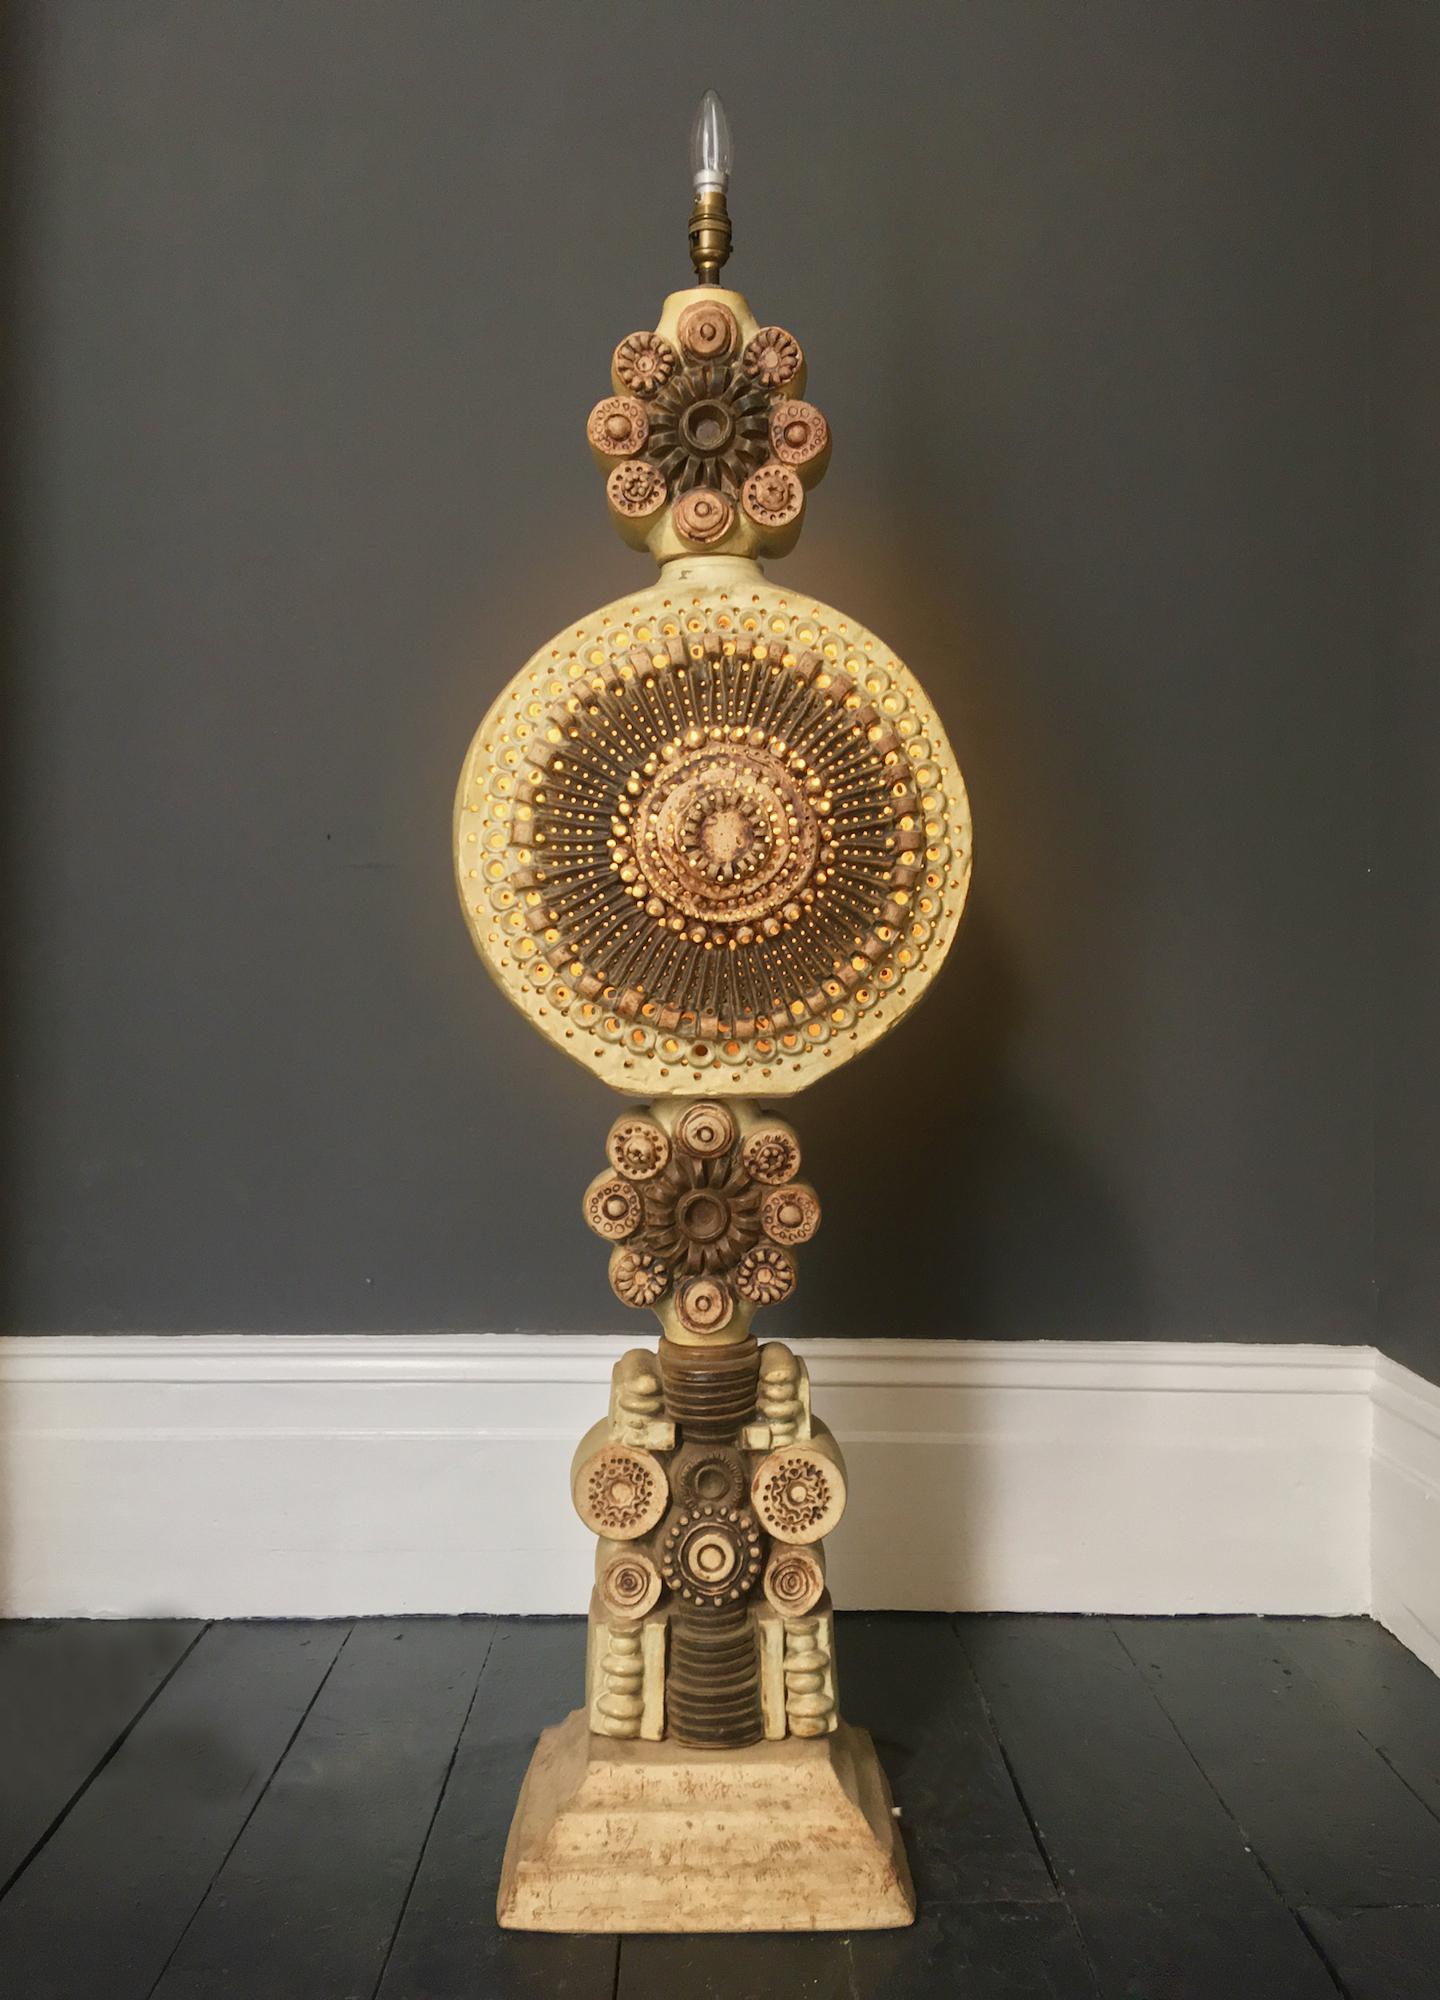 A monumental ceramic TOTEM floor lamp with pierced detail by Bernard Rooke, England, 1970s.

An impressive sculptural piece, made up of cast ceramic elements in warm neutral tones of natural stone, wheat and earth-brown, on a metal tube. The